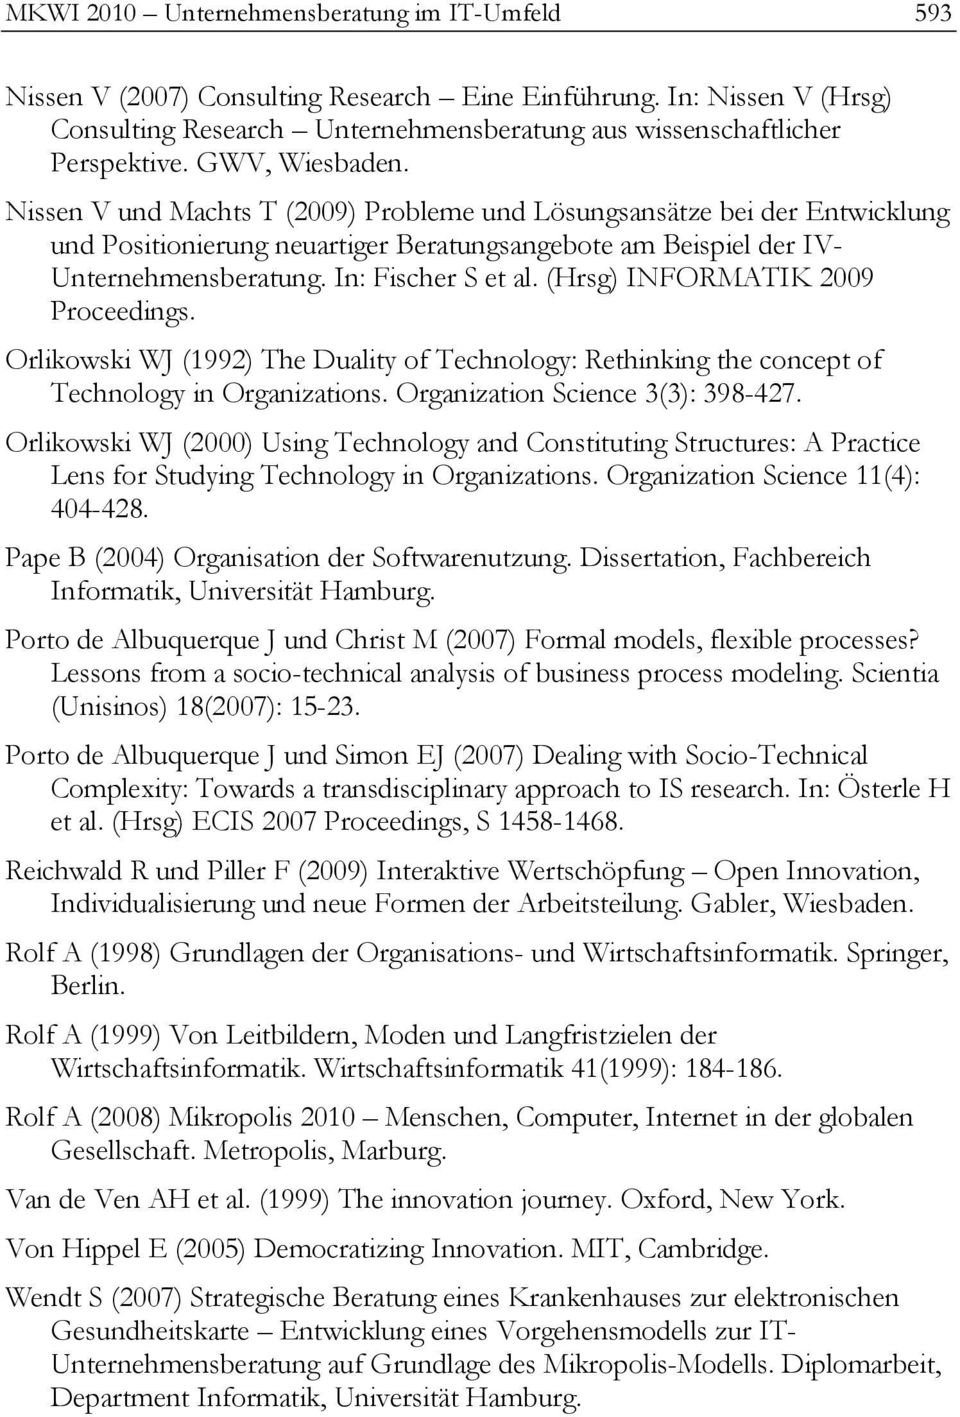 In: Fischer S et al. (Hrsg) INFORMATIK 2009 Proceedings. Orlikowski WJ (1992) The Duality of Technology: Rethinking the concept of Technology in Organizations. Organization Science 3(3): 398-427.